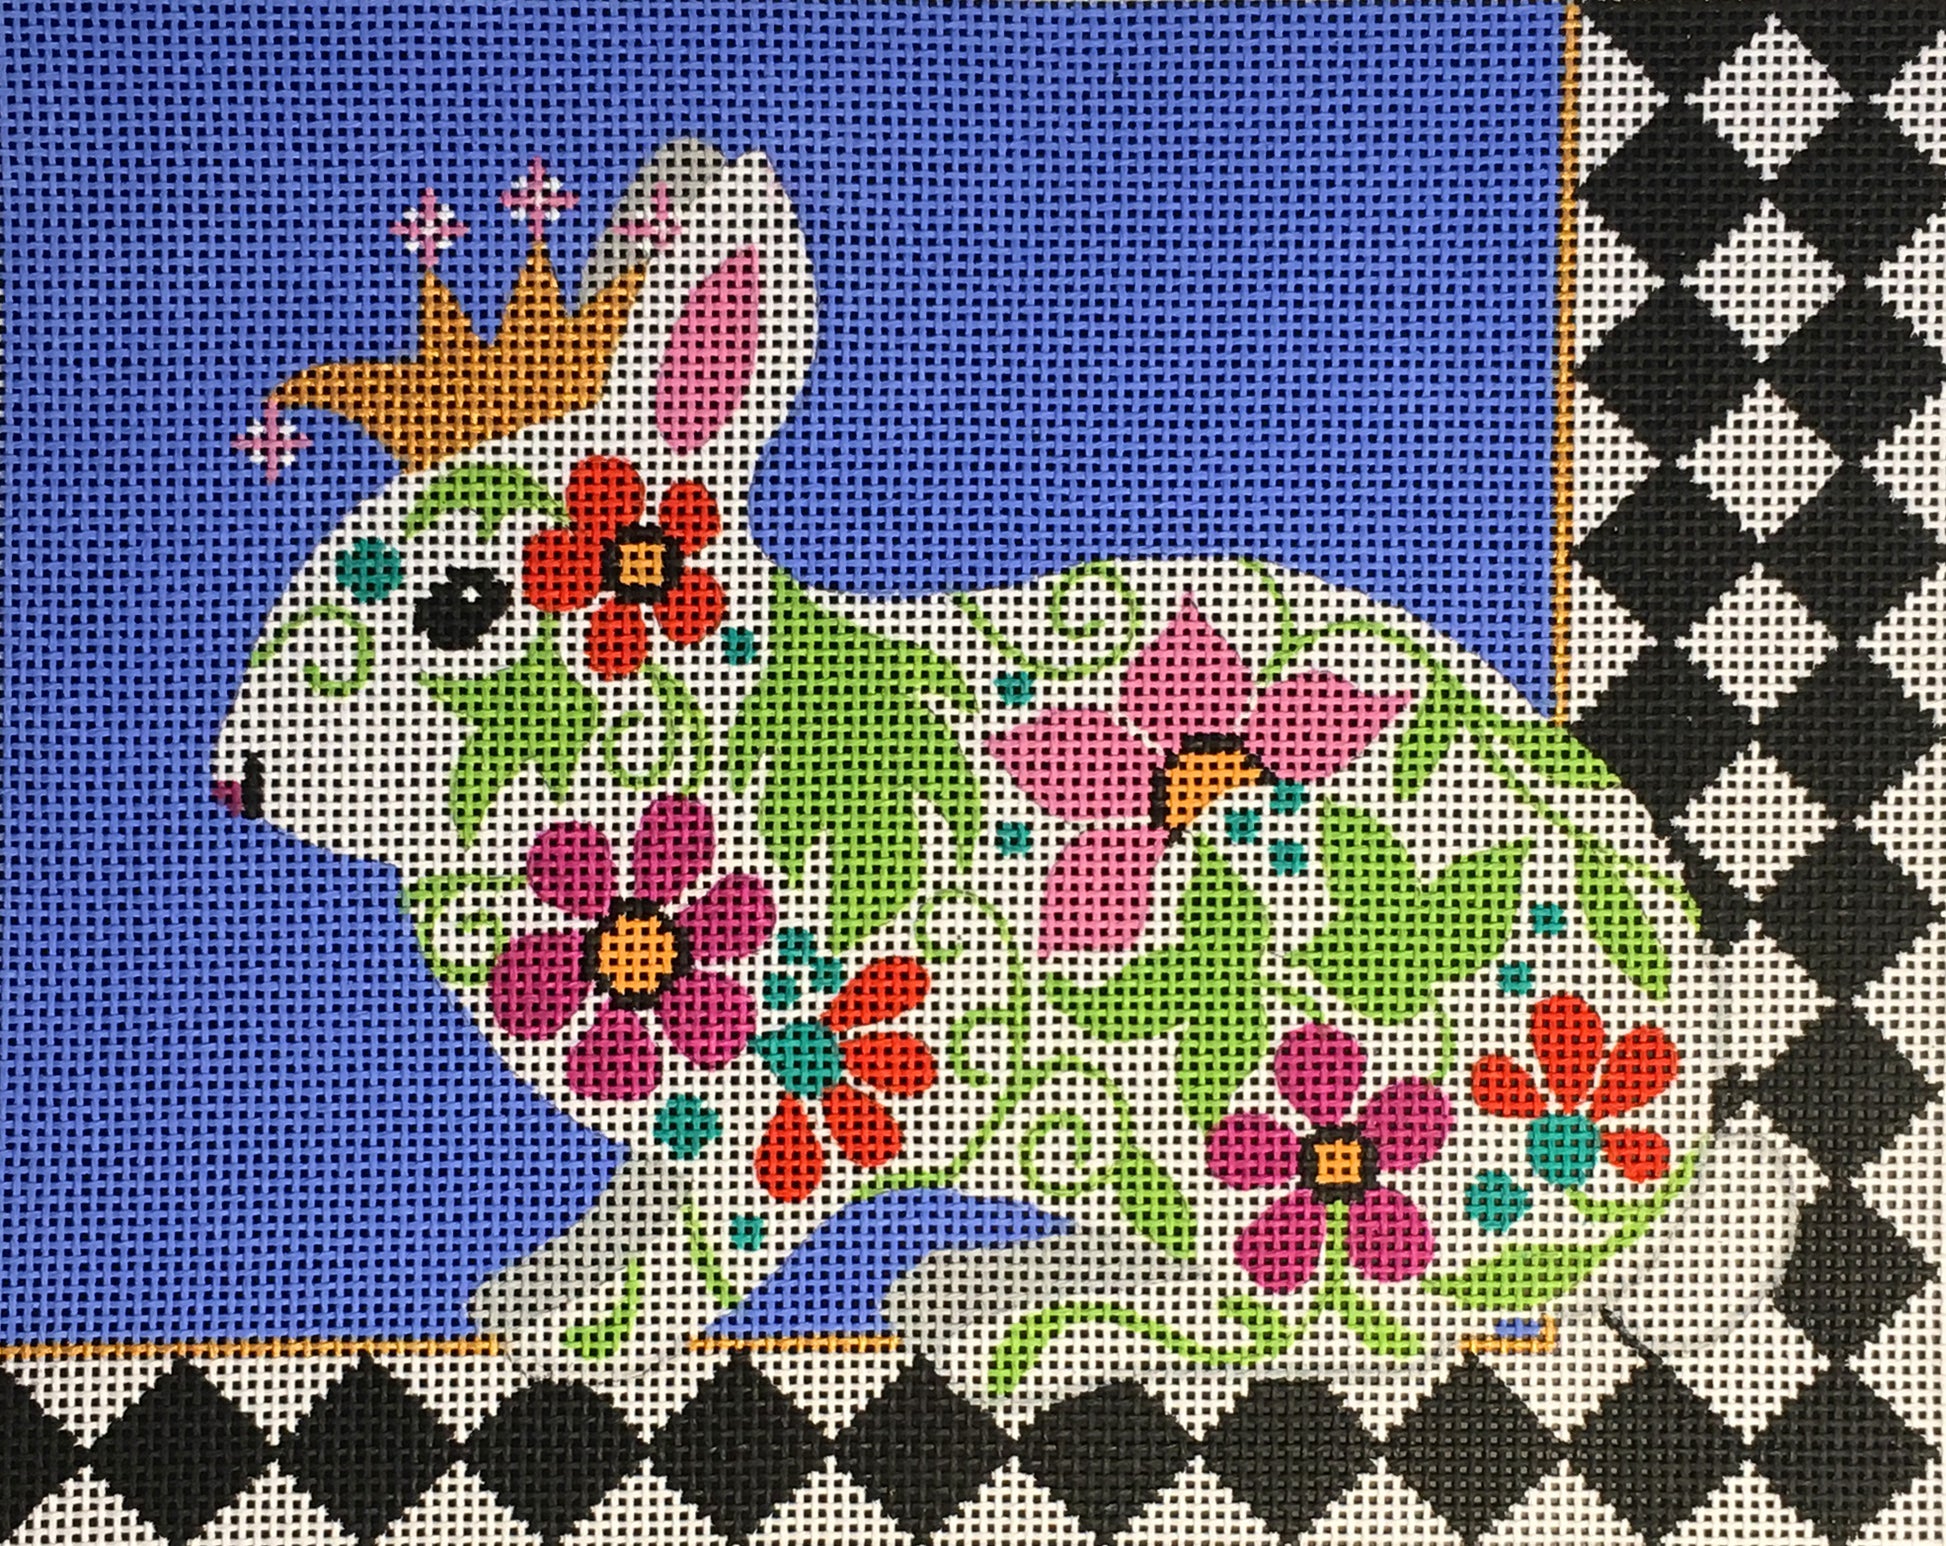 Amanda Lawford needlepoint canvas of a floral bunny rabbit wearing a crown with a bold black and white harlequin border